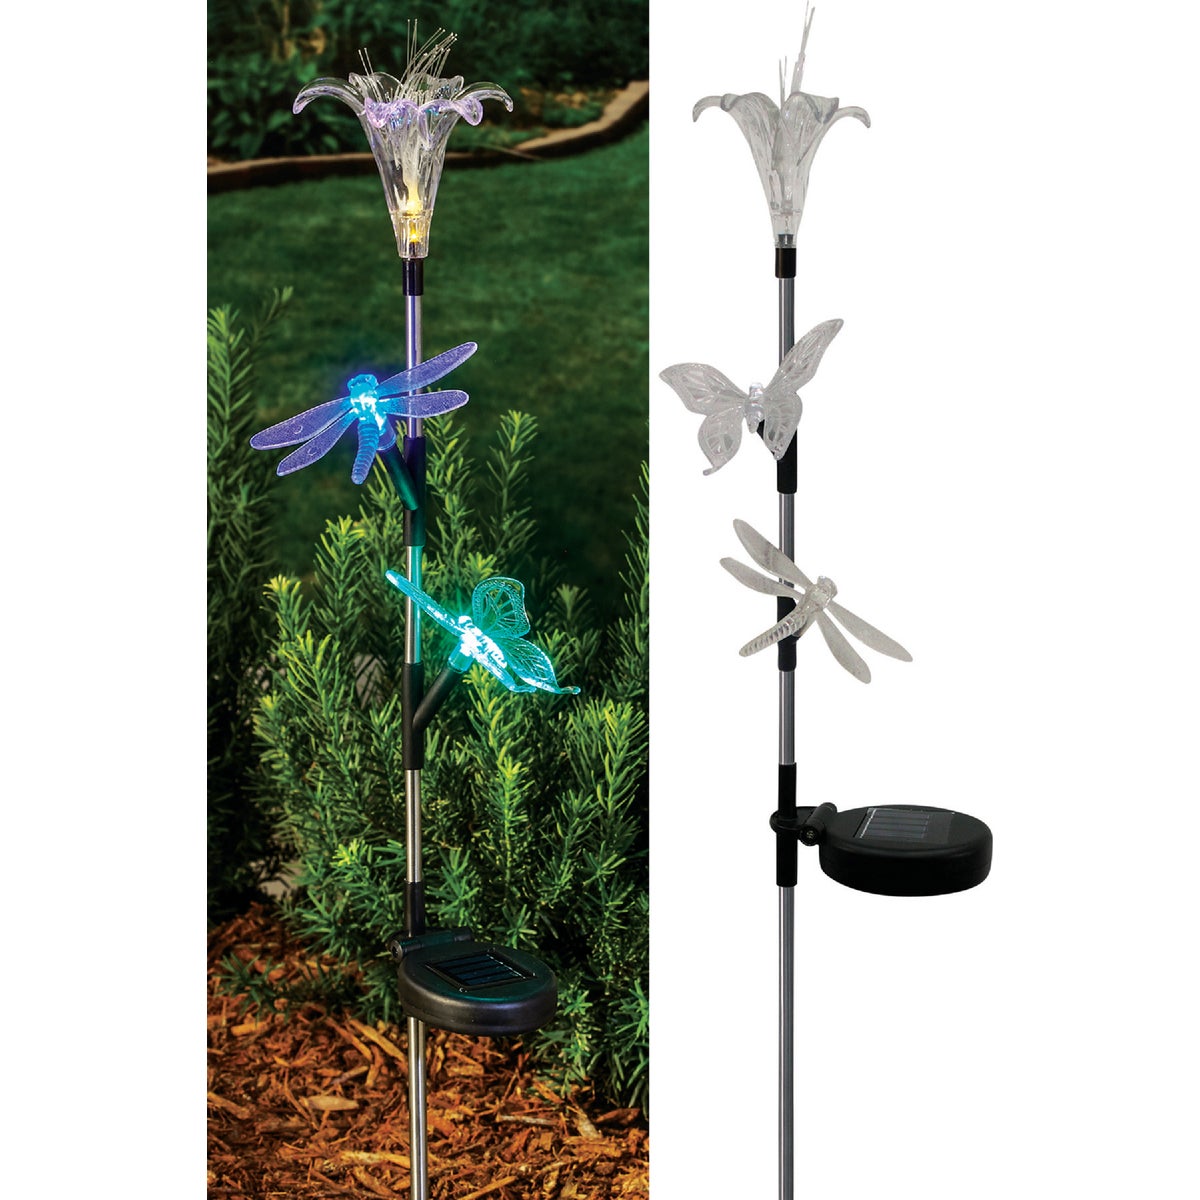 SOLAR FLWR INSECT LIGHT